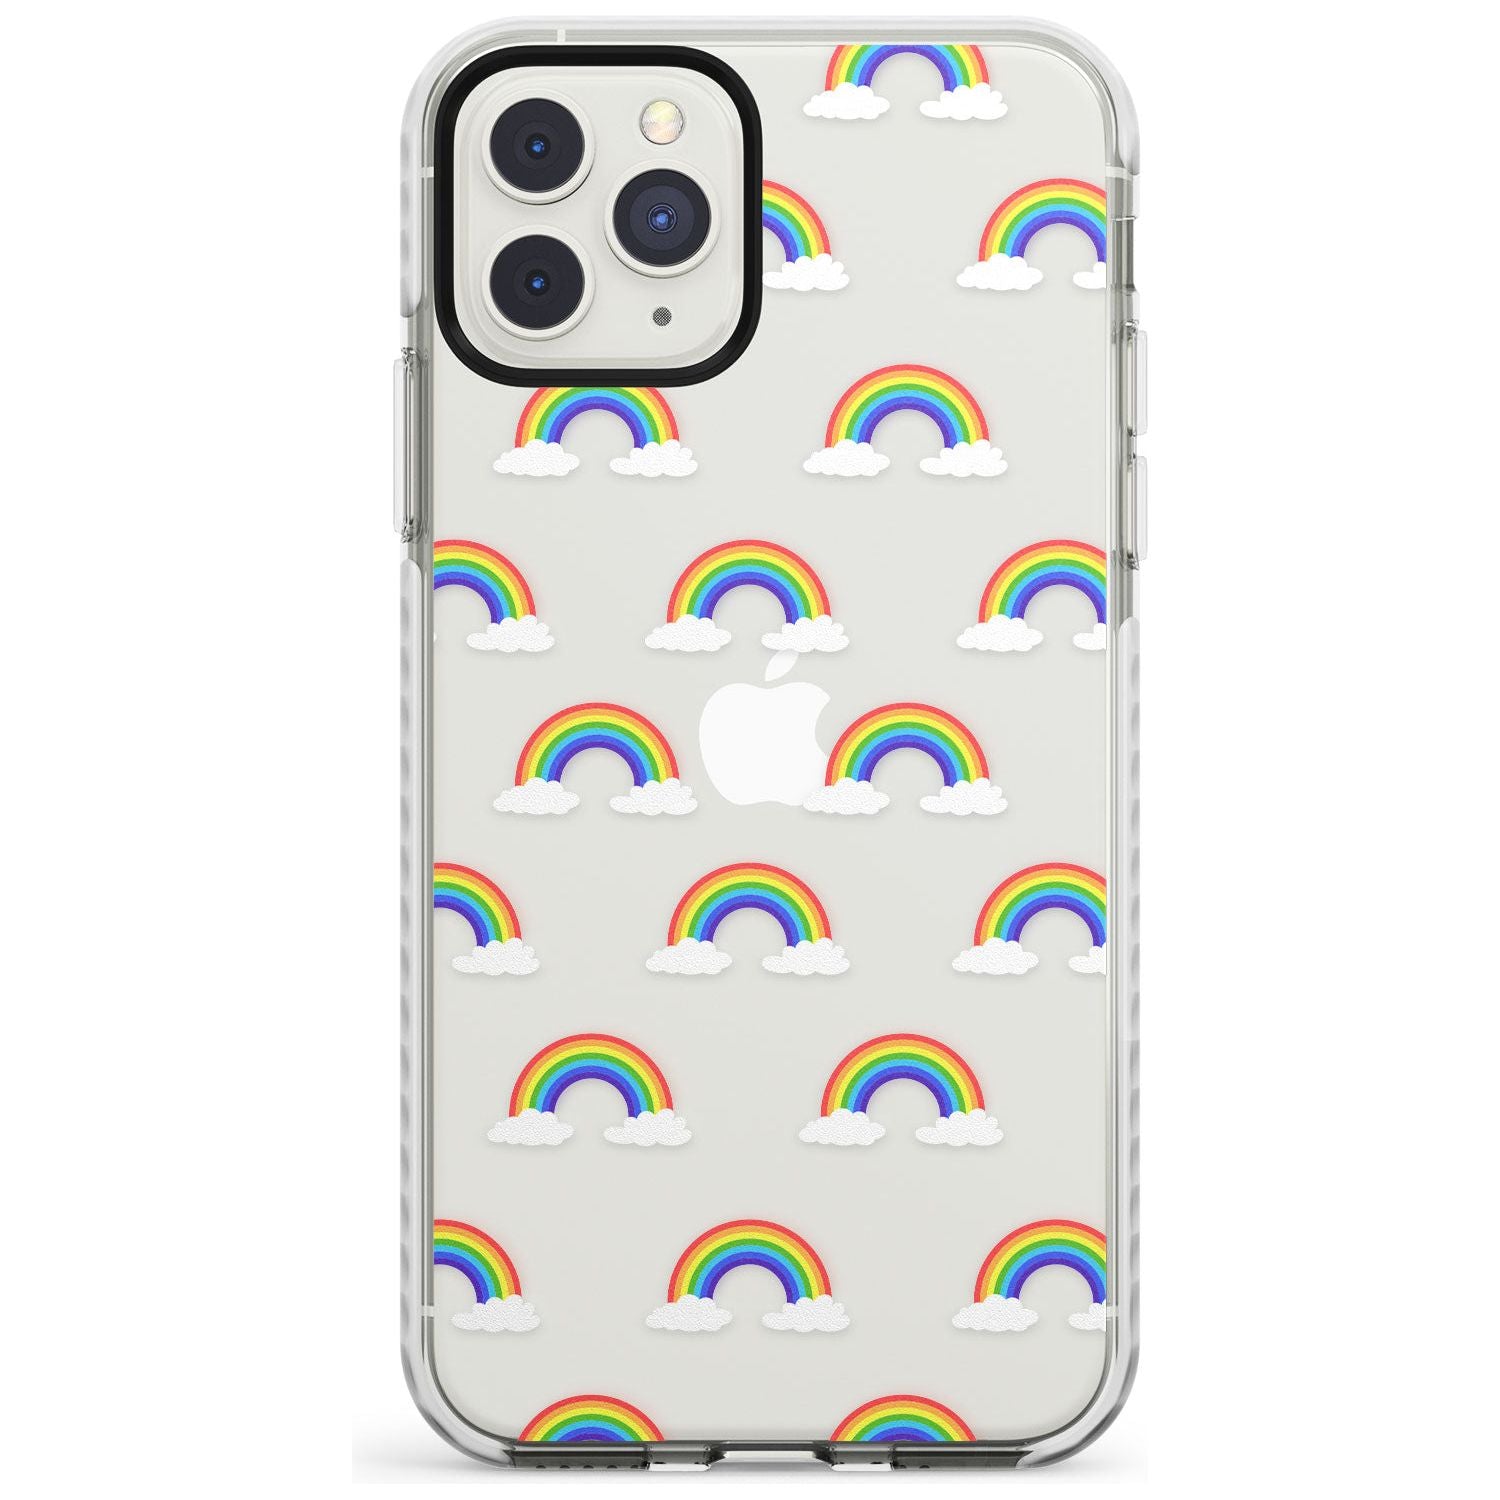 Rainbow of possibilities Impact Phone Case for iPhone 11 Pro Max